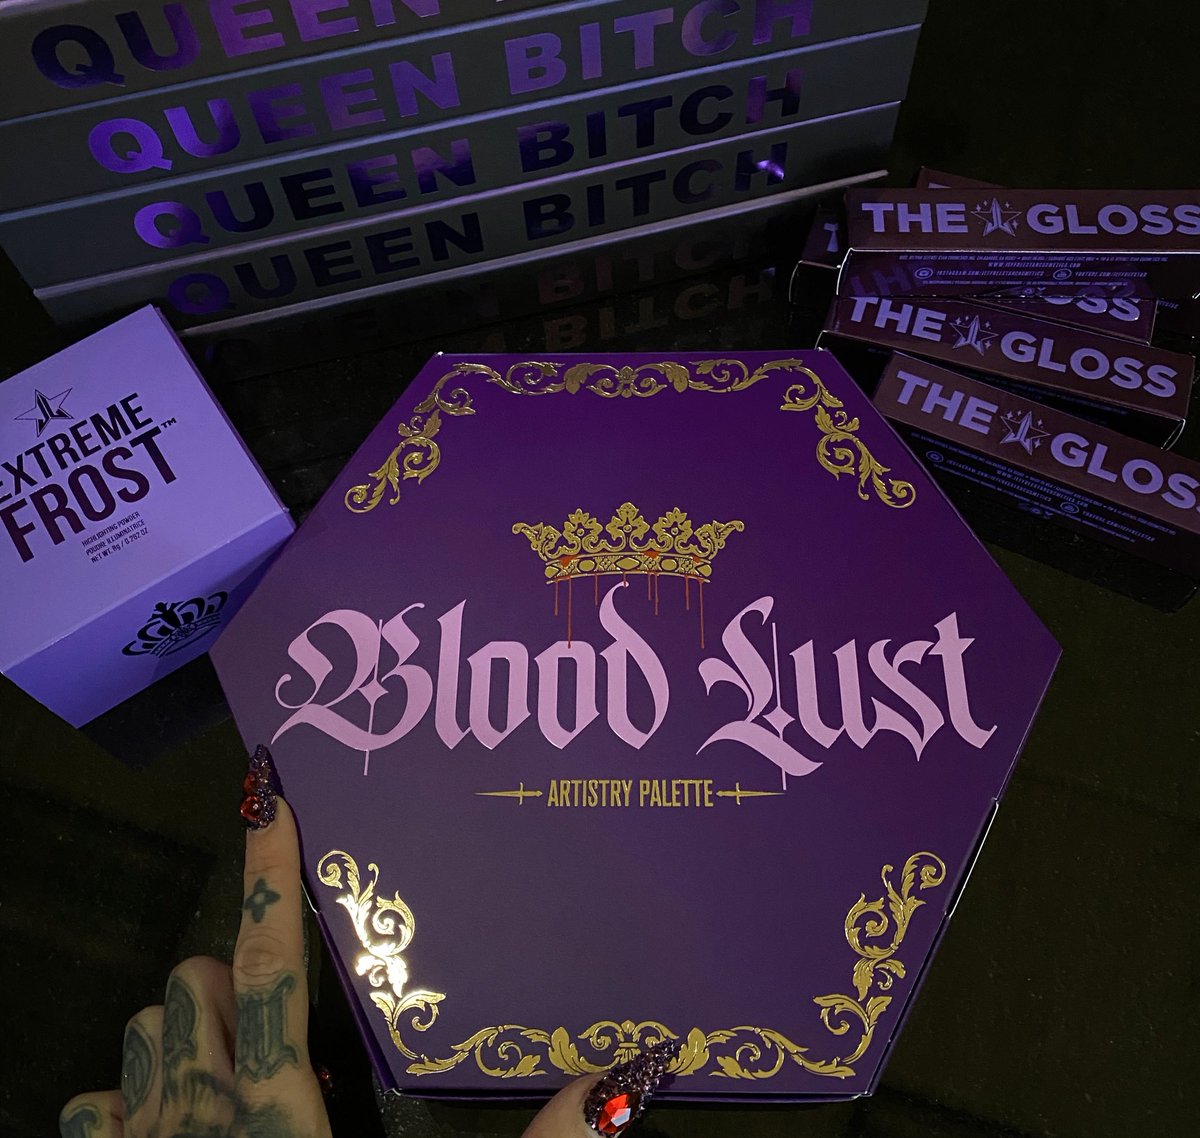 Introducing the #BLOODLUST eyeshadow palette & collection!!!! 💜🩸The 3rd installment in the world famous #jeffreestarcosmetics Blood line is jaw dropping and the FULL reveal video will be on my channel TOMORROW morning!!!! 🔪 This new iconic hexagon is a first of its kind🔥⚔️